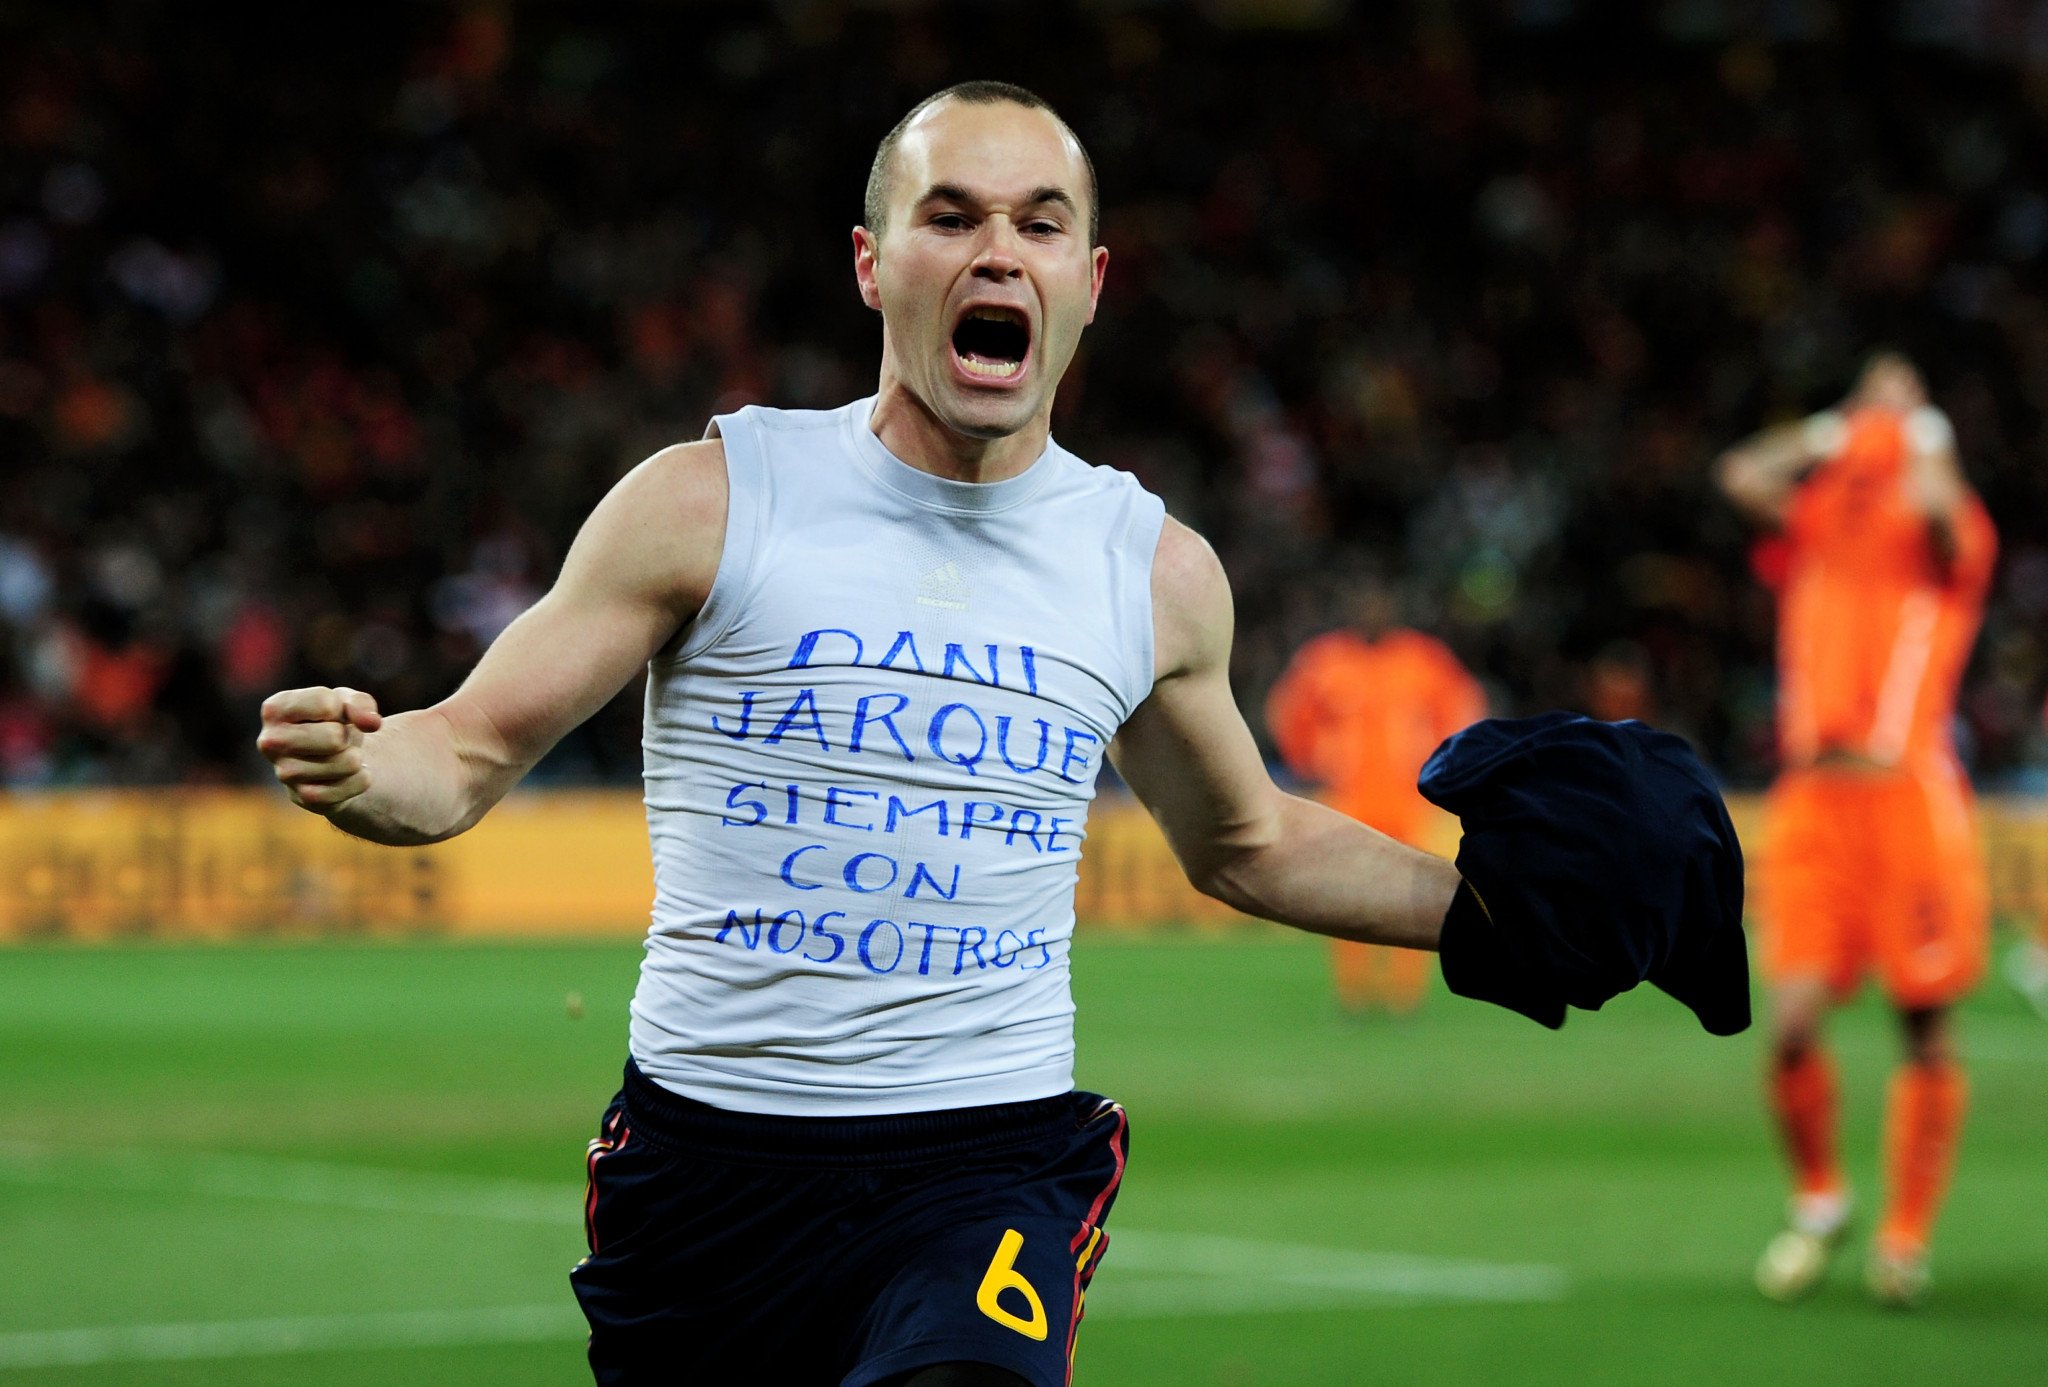 Andrés Iniesta celebrates the winning goal in the 2010 FIFA World Cup final ©Getty Images